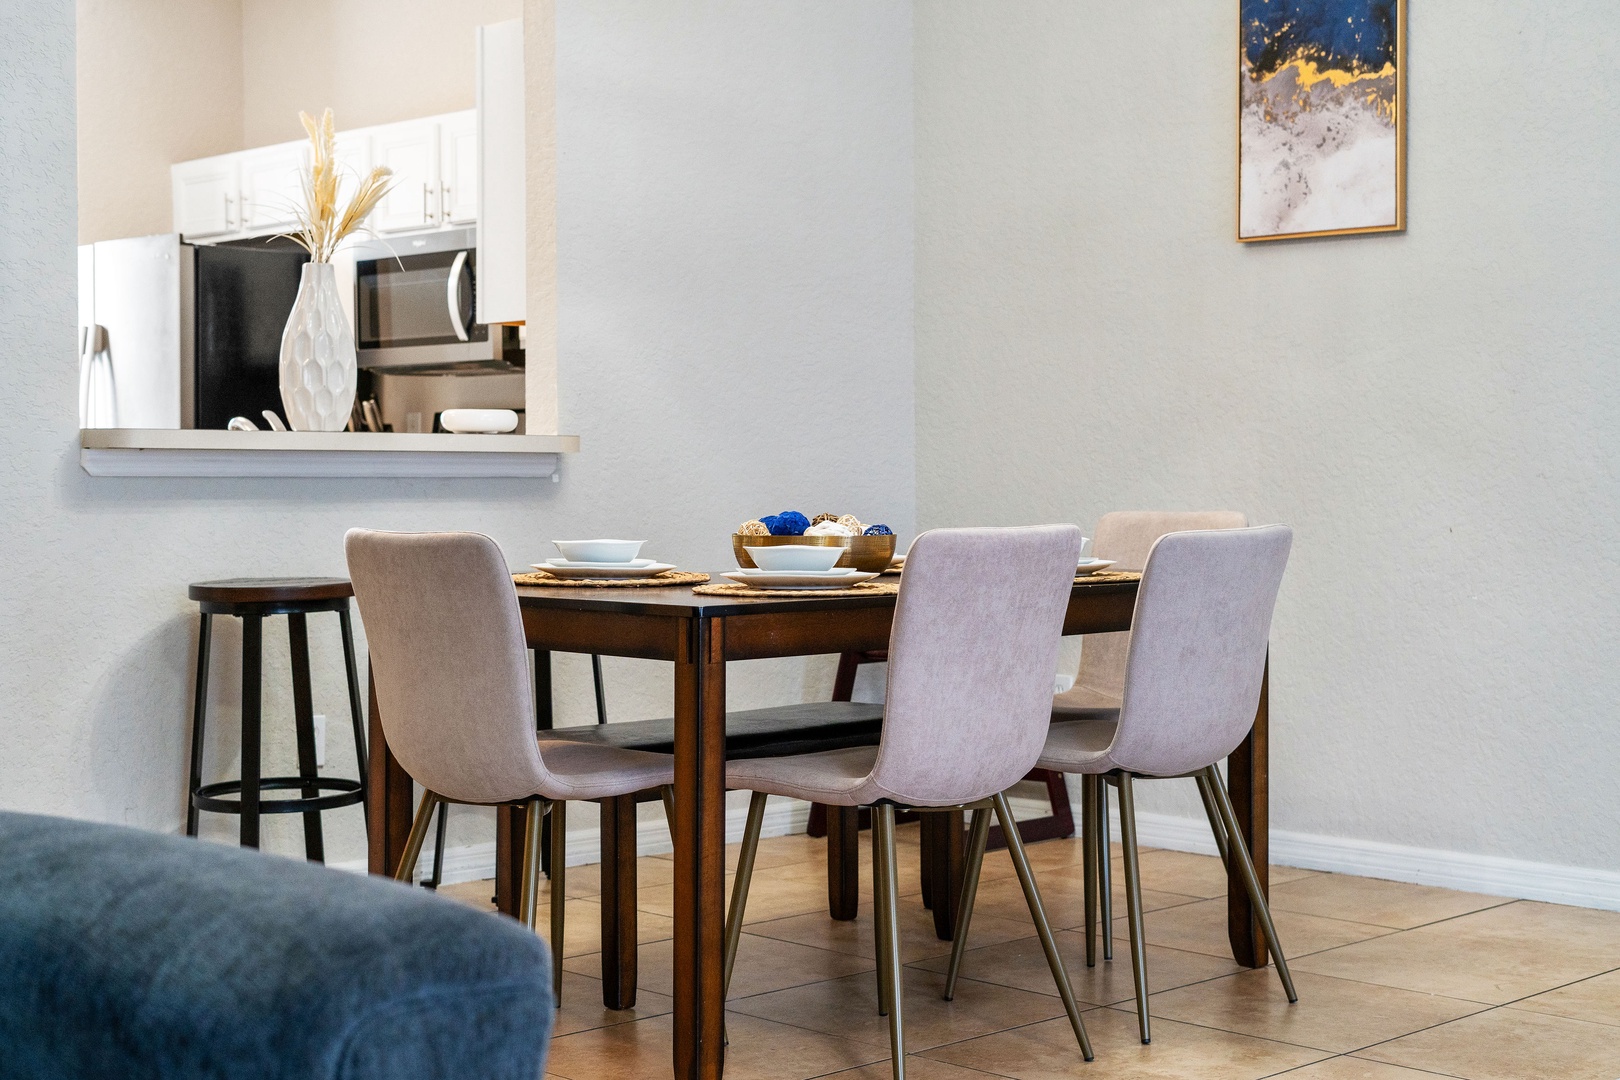 Gather for meals together at the dining table, with seating for 7